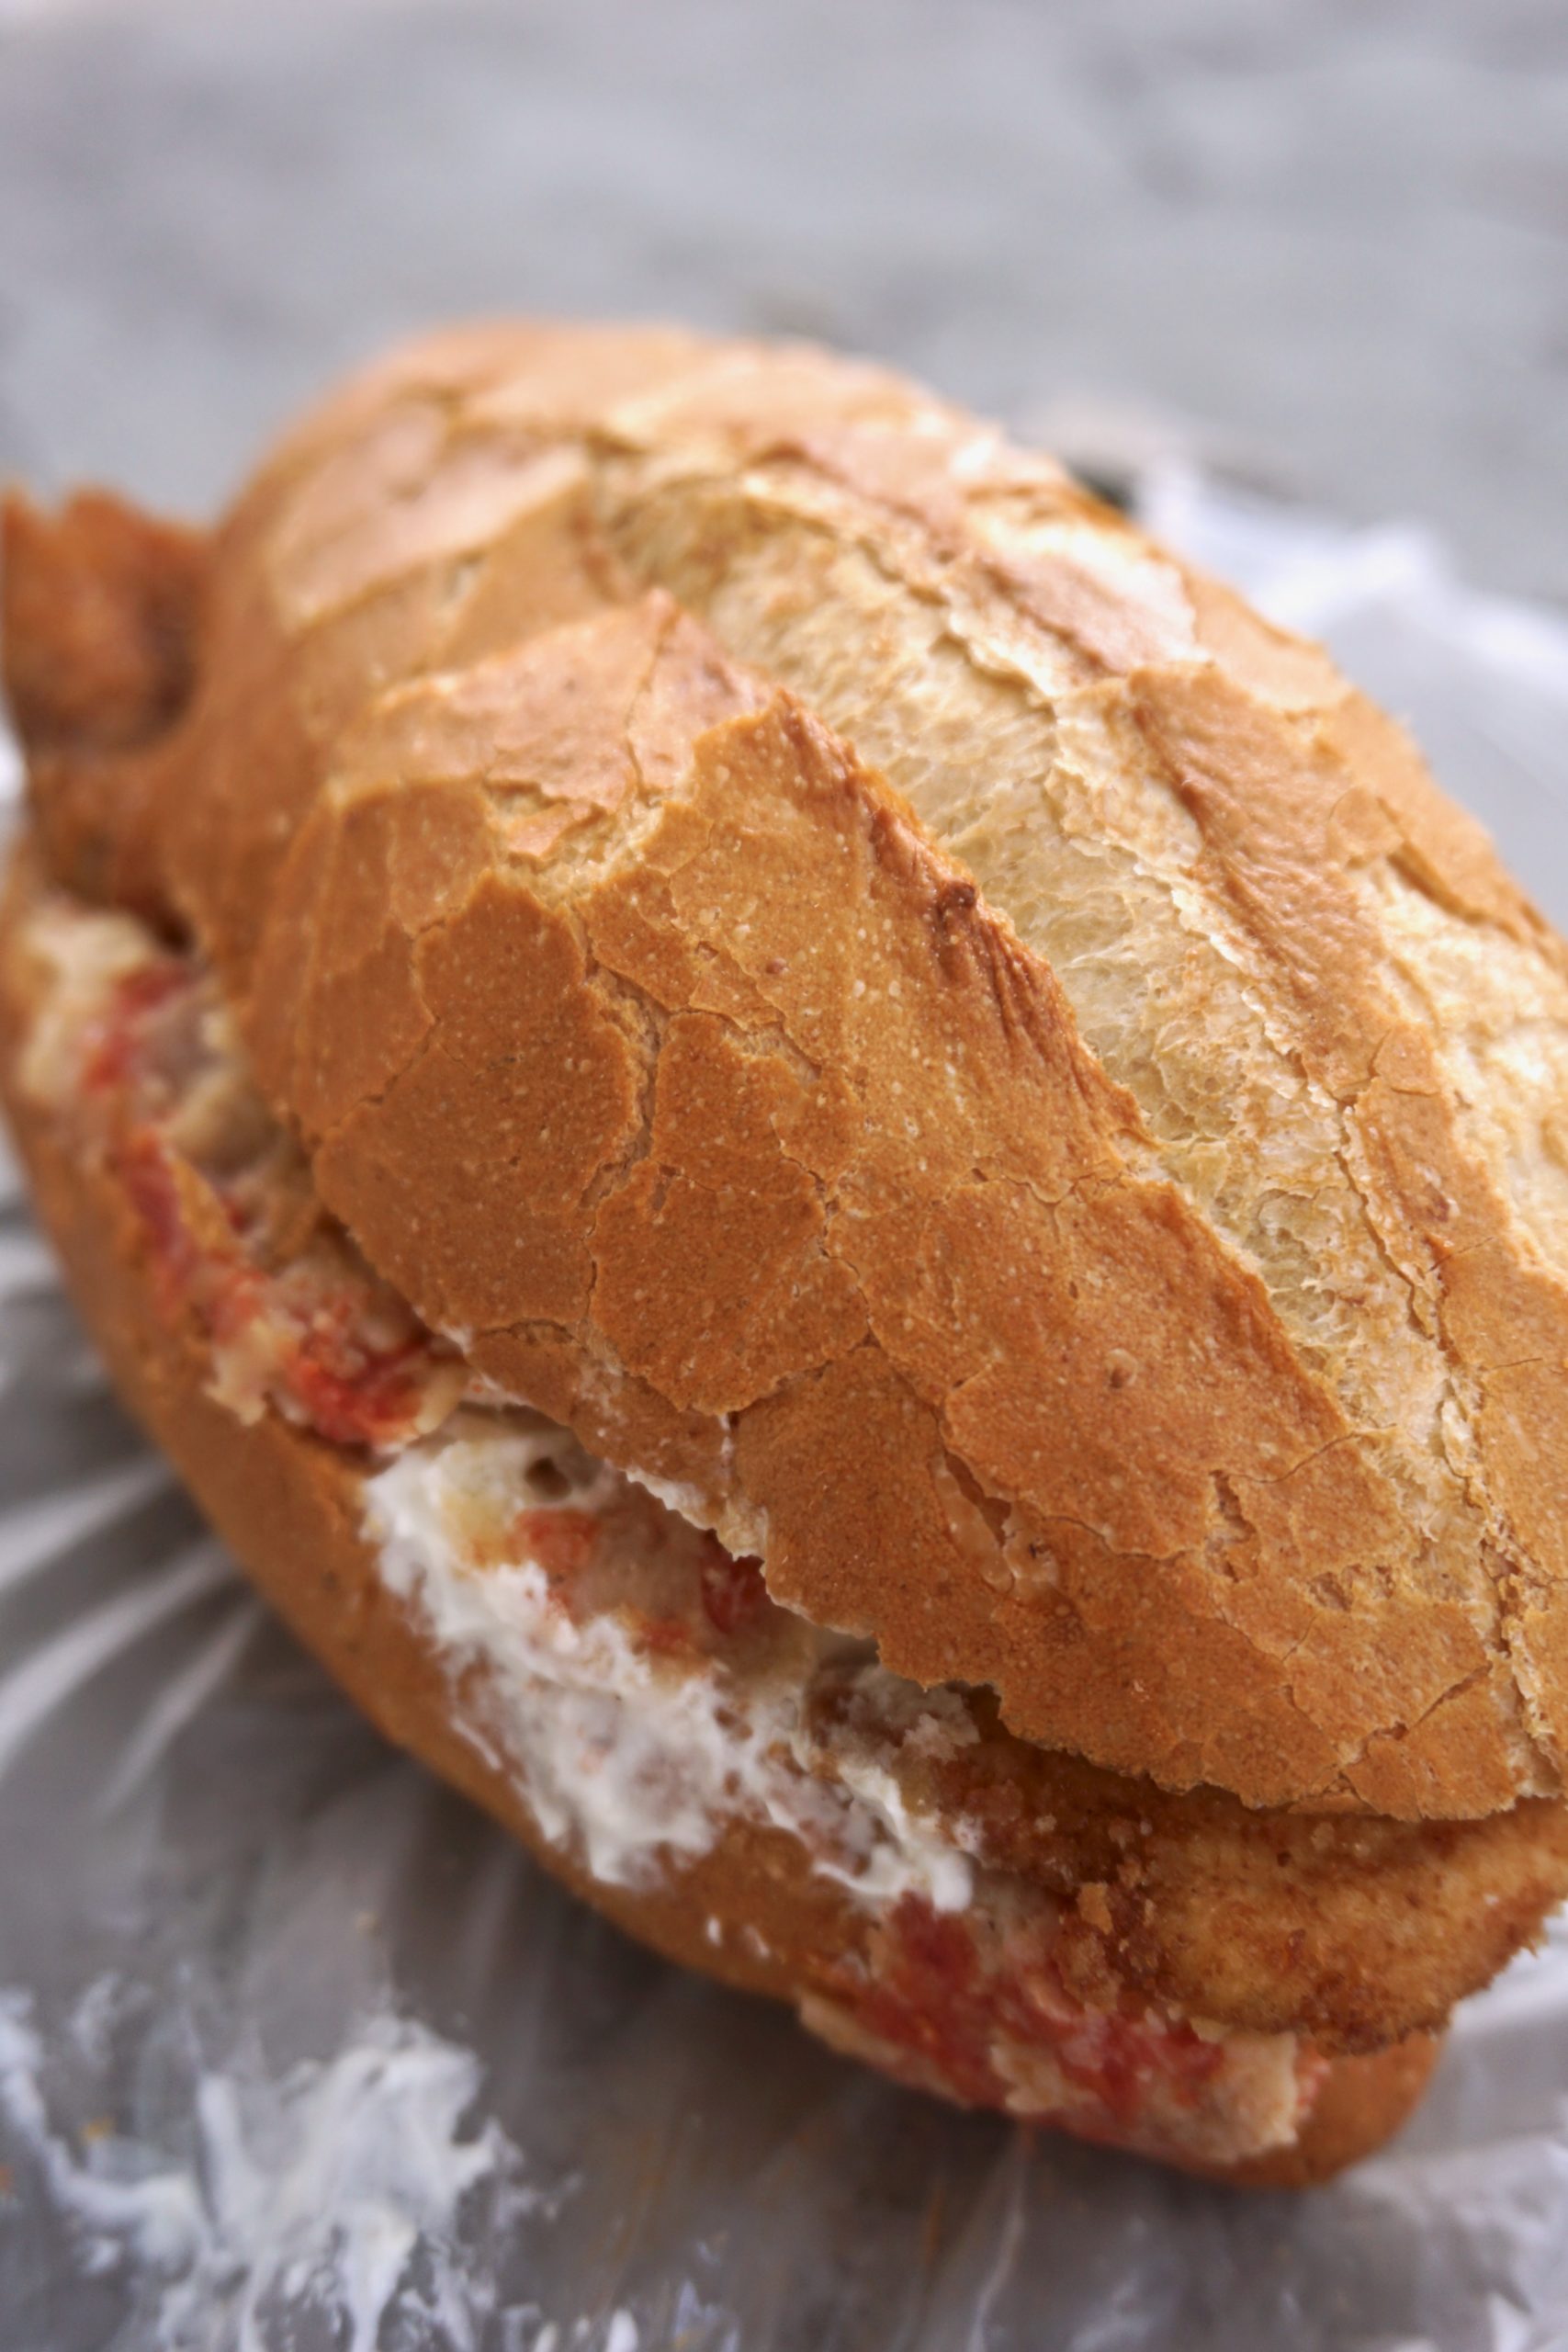 Torta filled with red chilaquiles, sour cream, and chicken milanese on a plastic wrapper